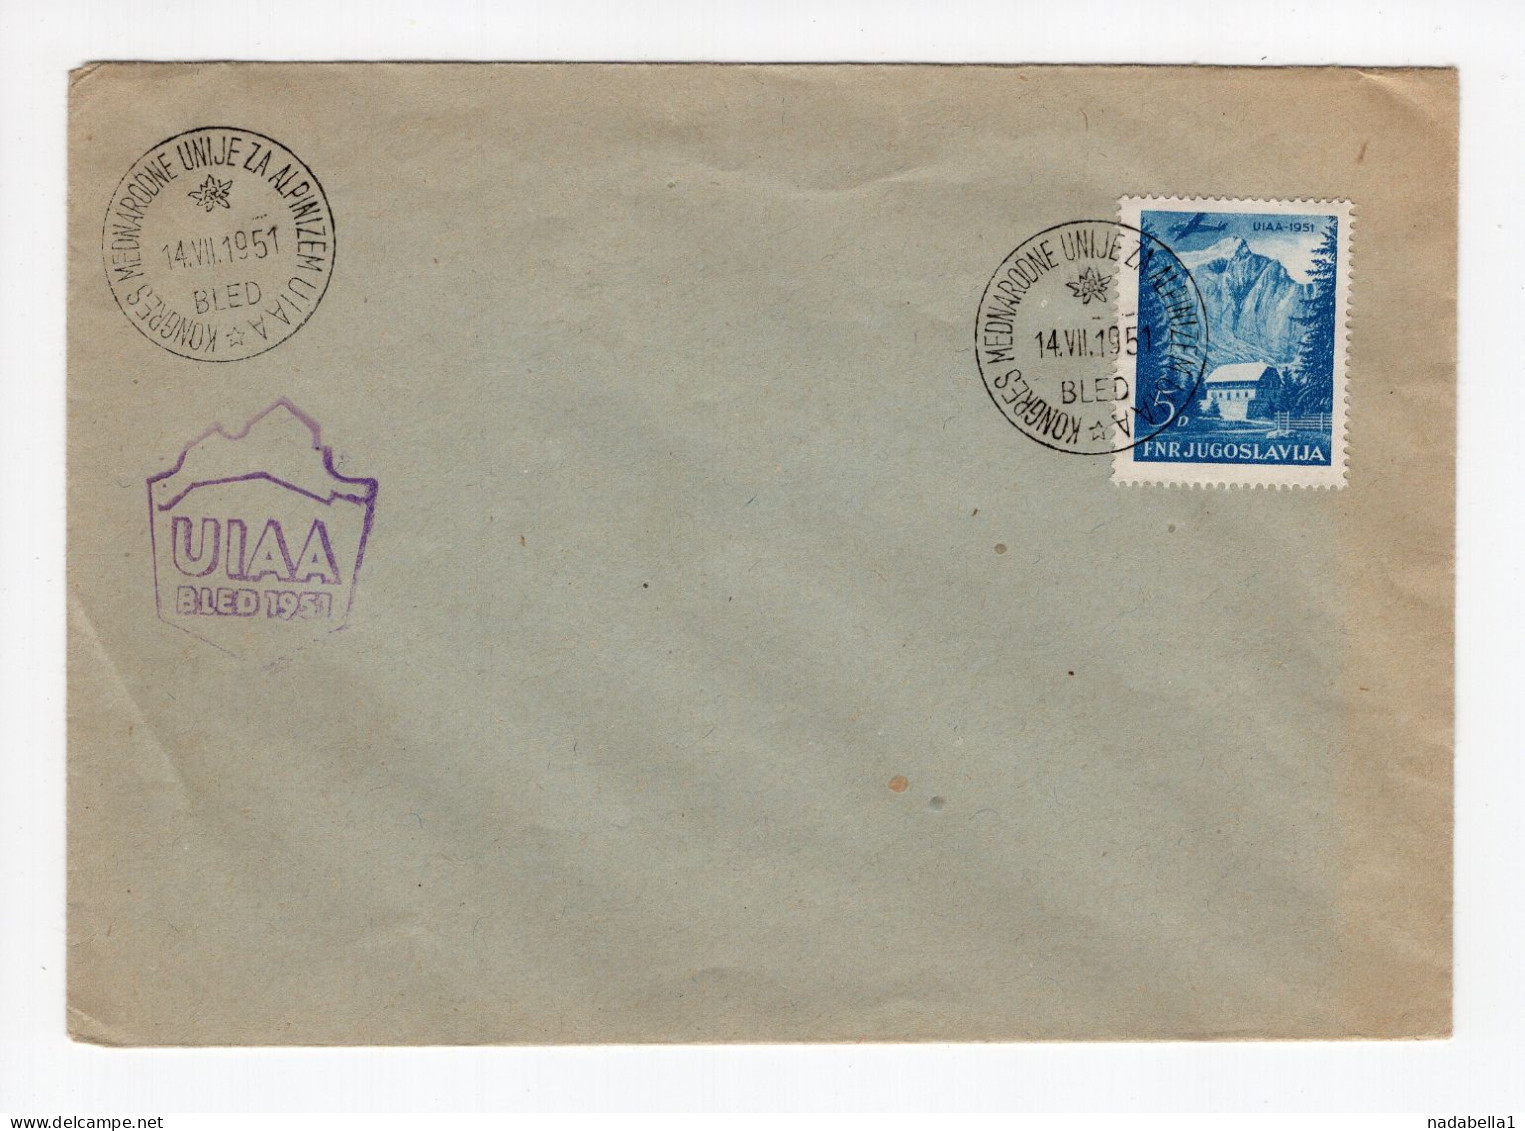 1951. YUGOSLAVIA,SLOVENIA,BLED,COVER,UIAA BLED,SPECIAL CANCELLATION:ALPINE INTERNATIONAL SOCIETY CONGRESS - Lettres & Documents